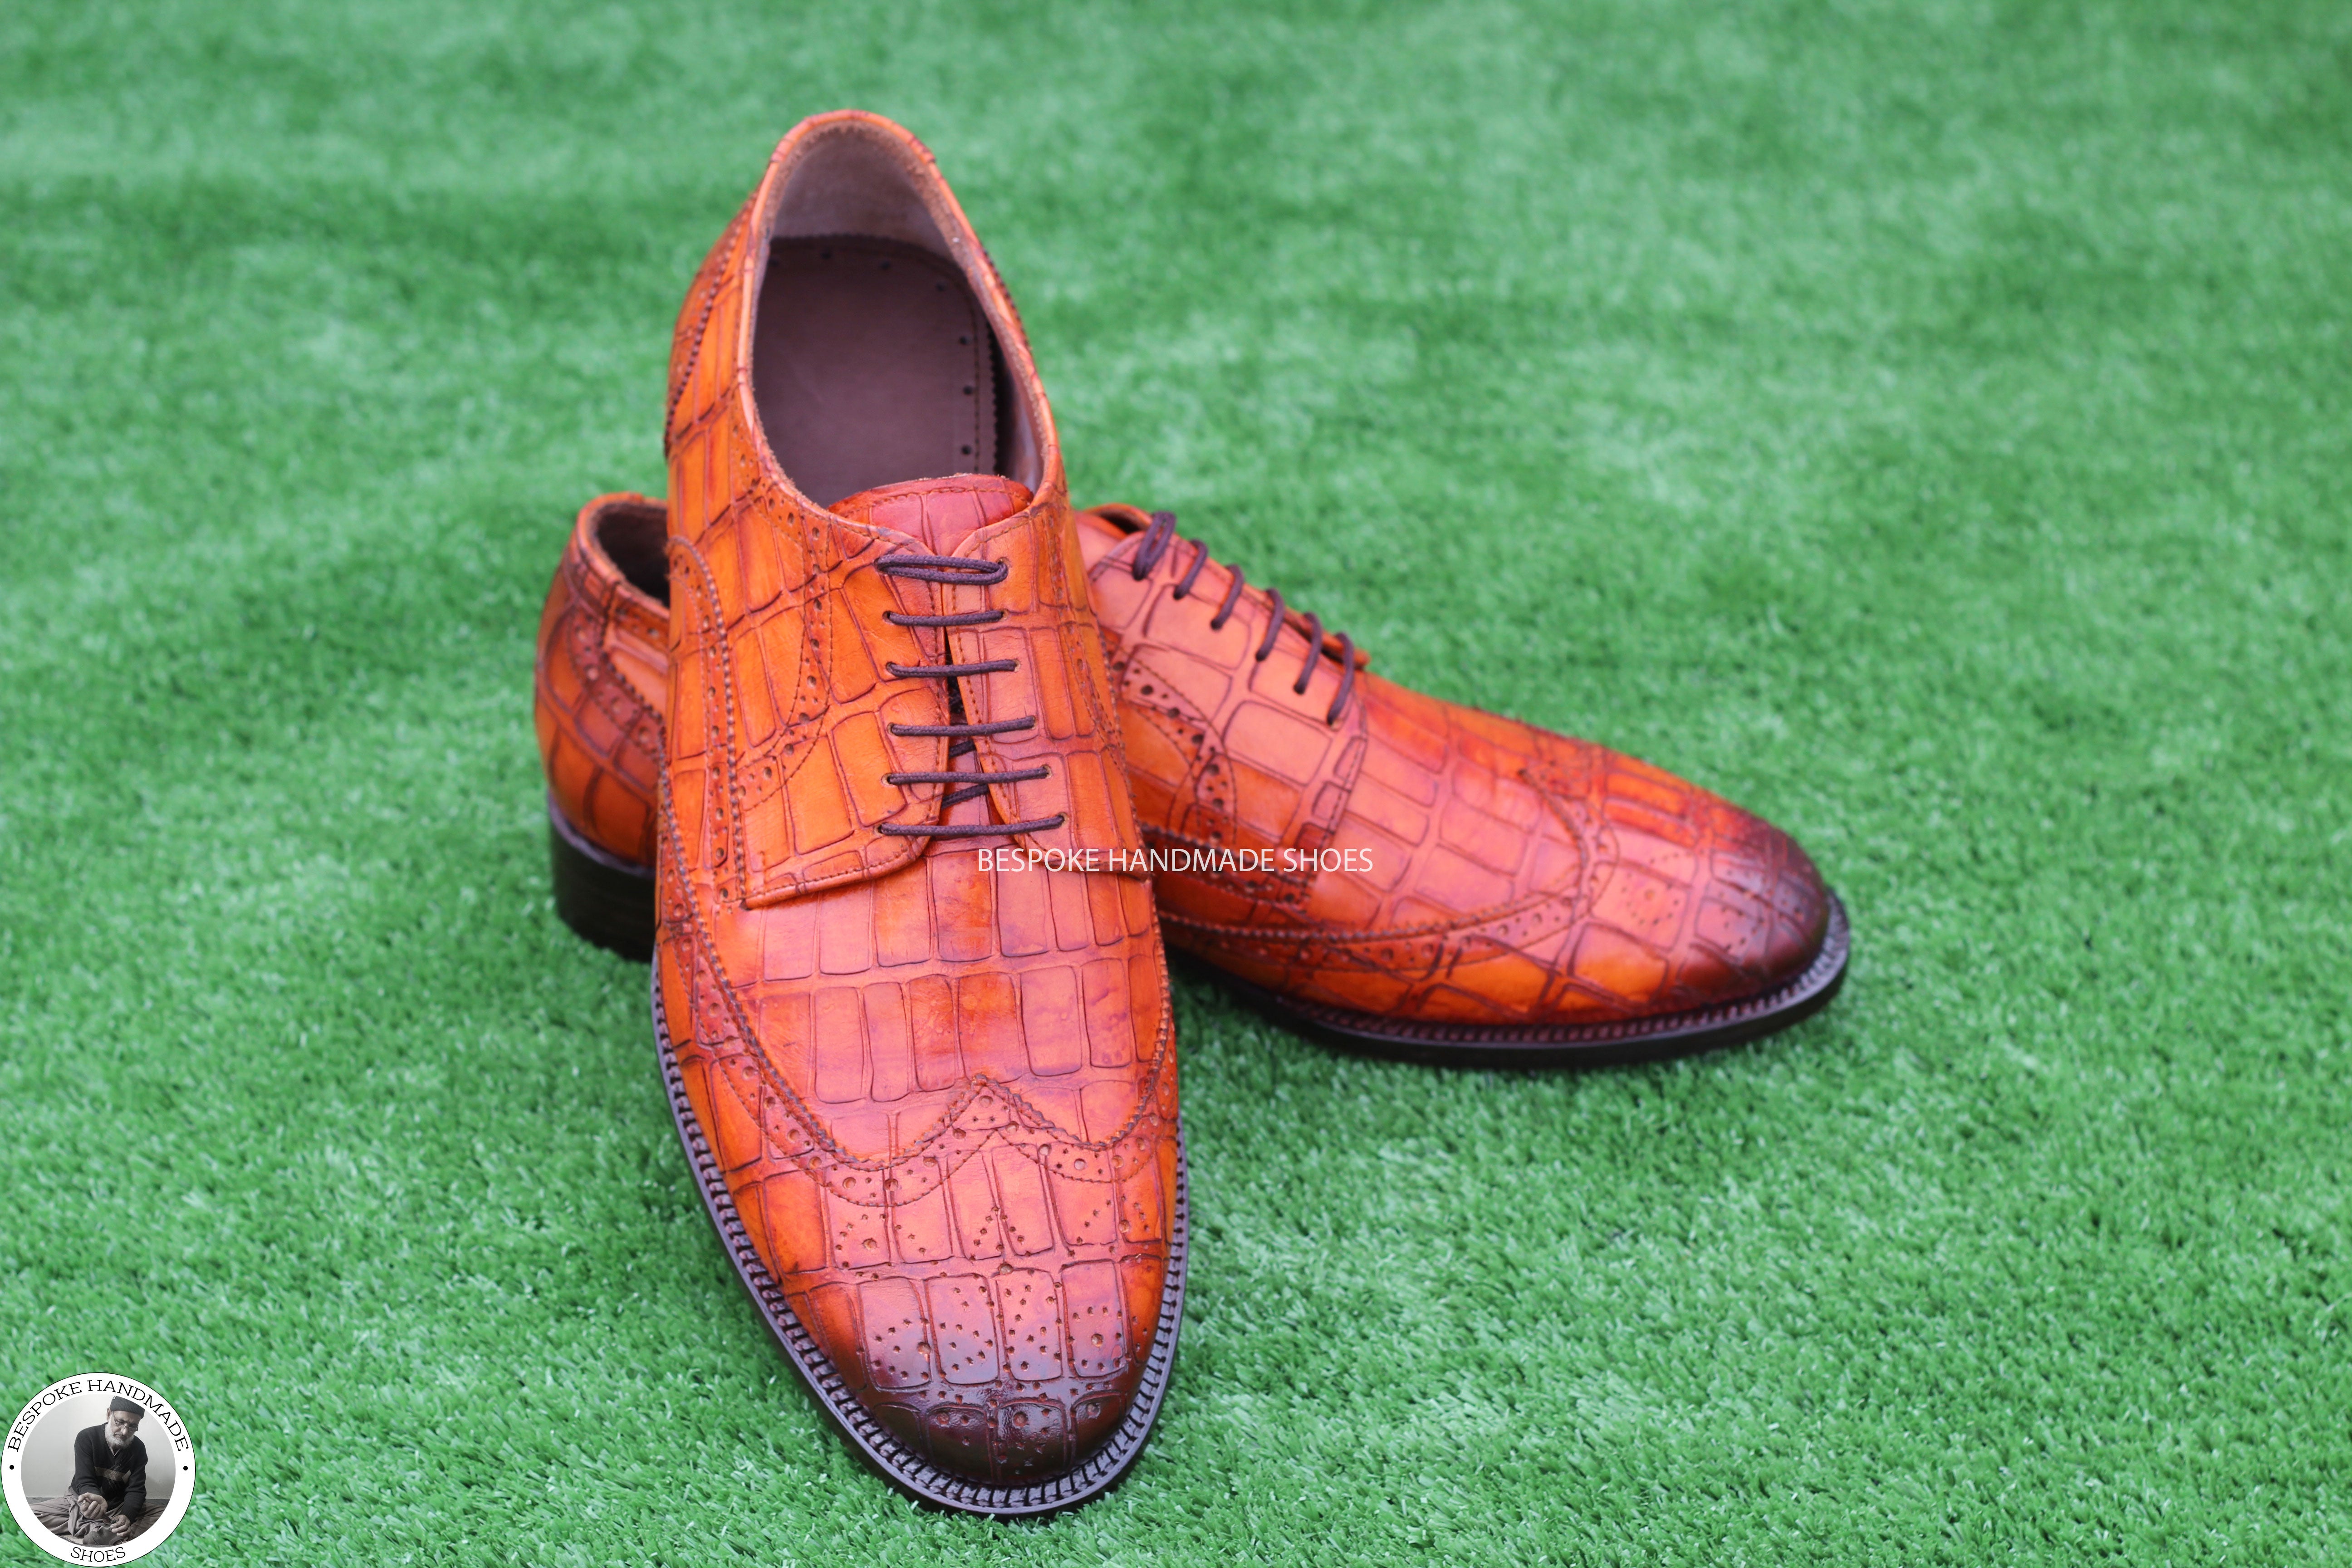 Custom Made Orange Tan Hand Painted Animal Print Leather Black Toe Shaded Oxford  Wingtip Lace Up Men Shoes